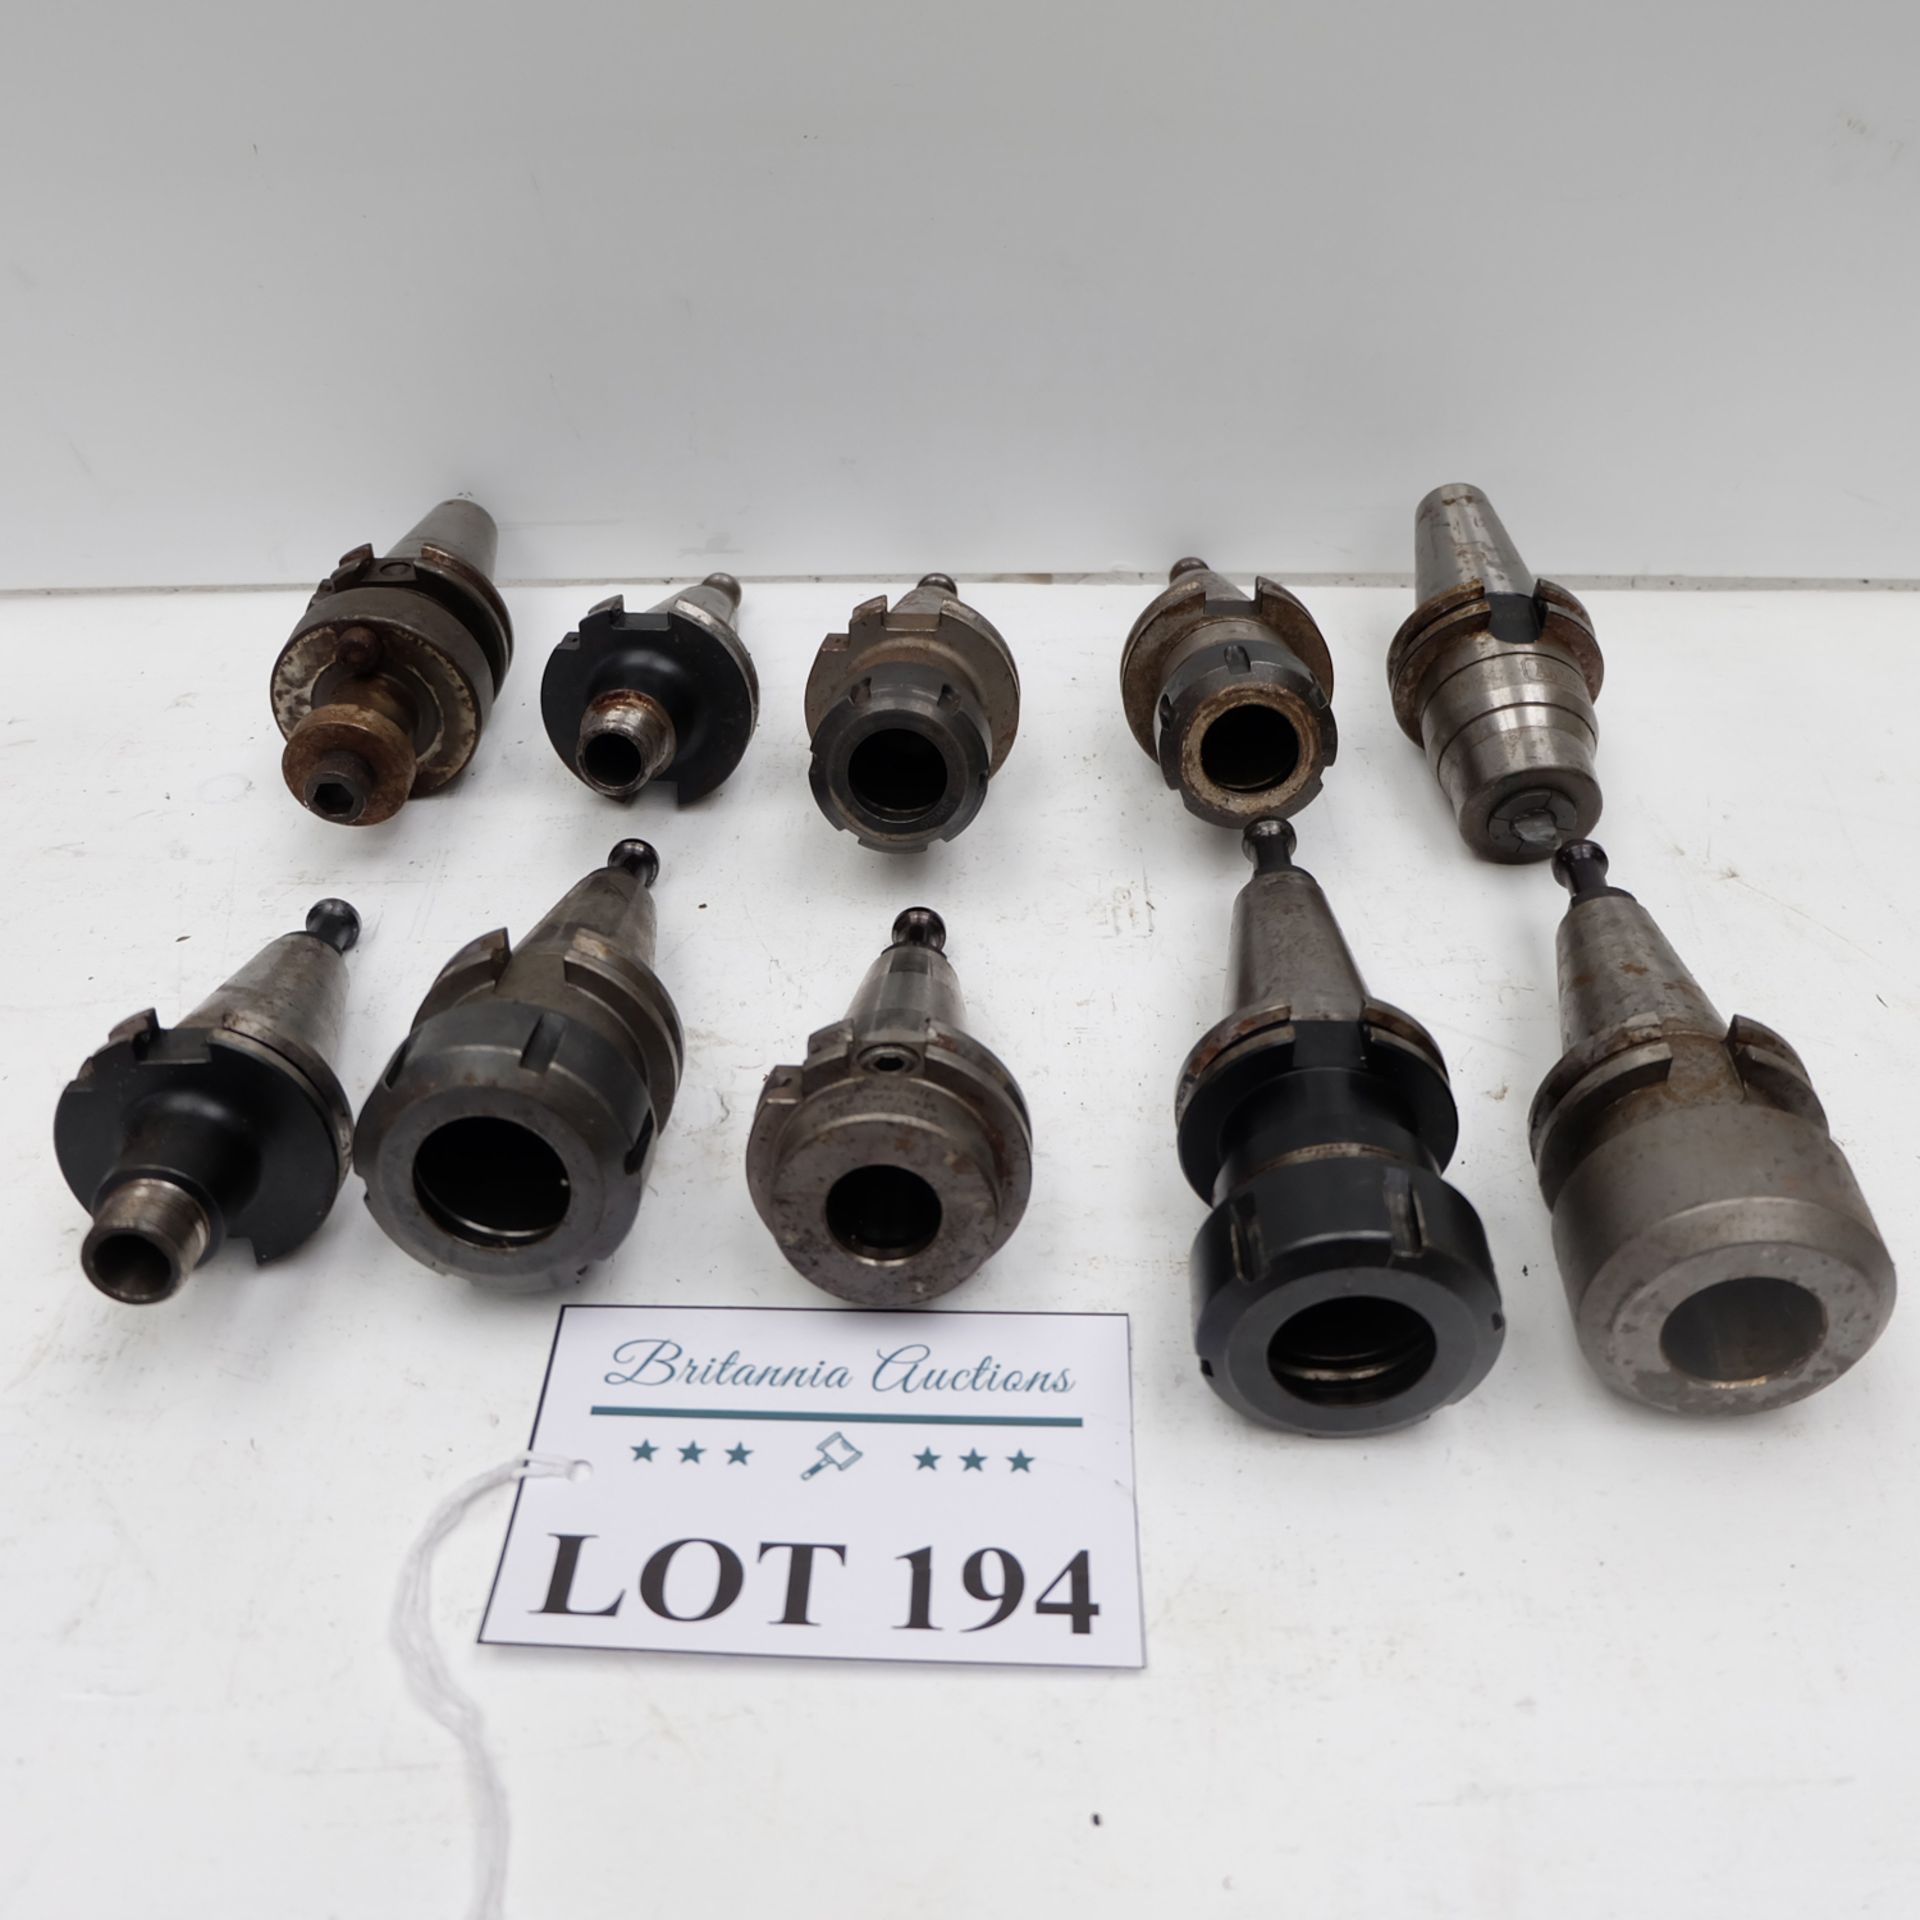 Quantity of 10 x SK40 Spindle Tooling. - Image 3 of 3